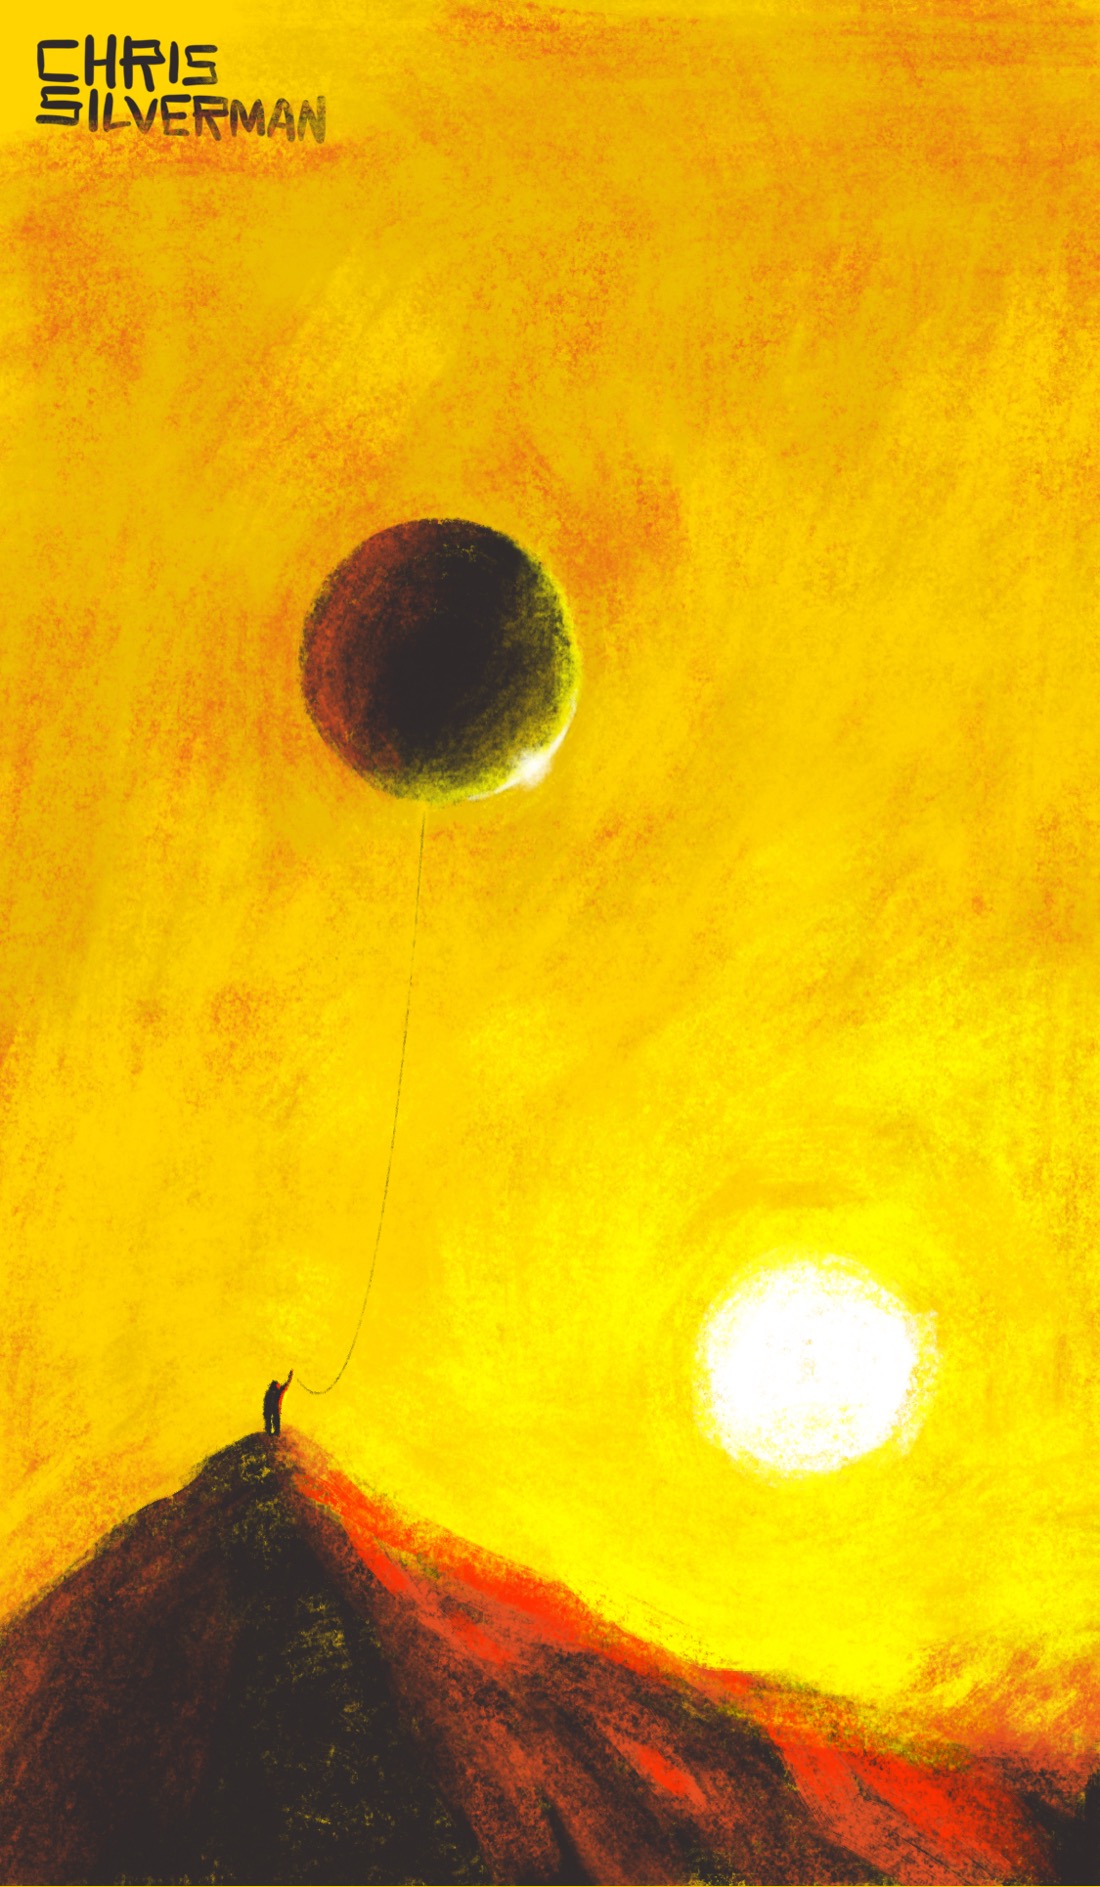 A desert sun, low in the sky. Below it is a red mountain with a small figure standing at the very top of it. The figure is holding a string attached to a huge black balloon, high above the ground. The sky is mostly shades of yellow, and the mountain is black, with red highlights.